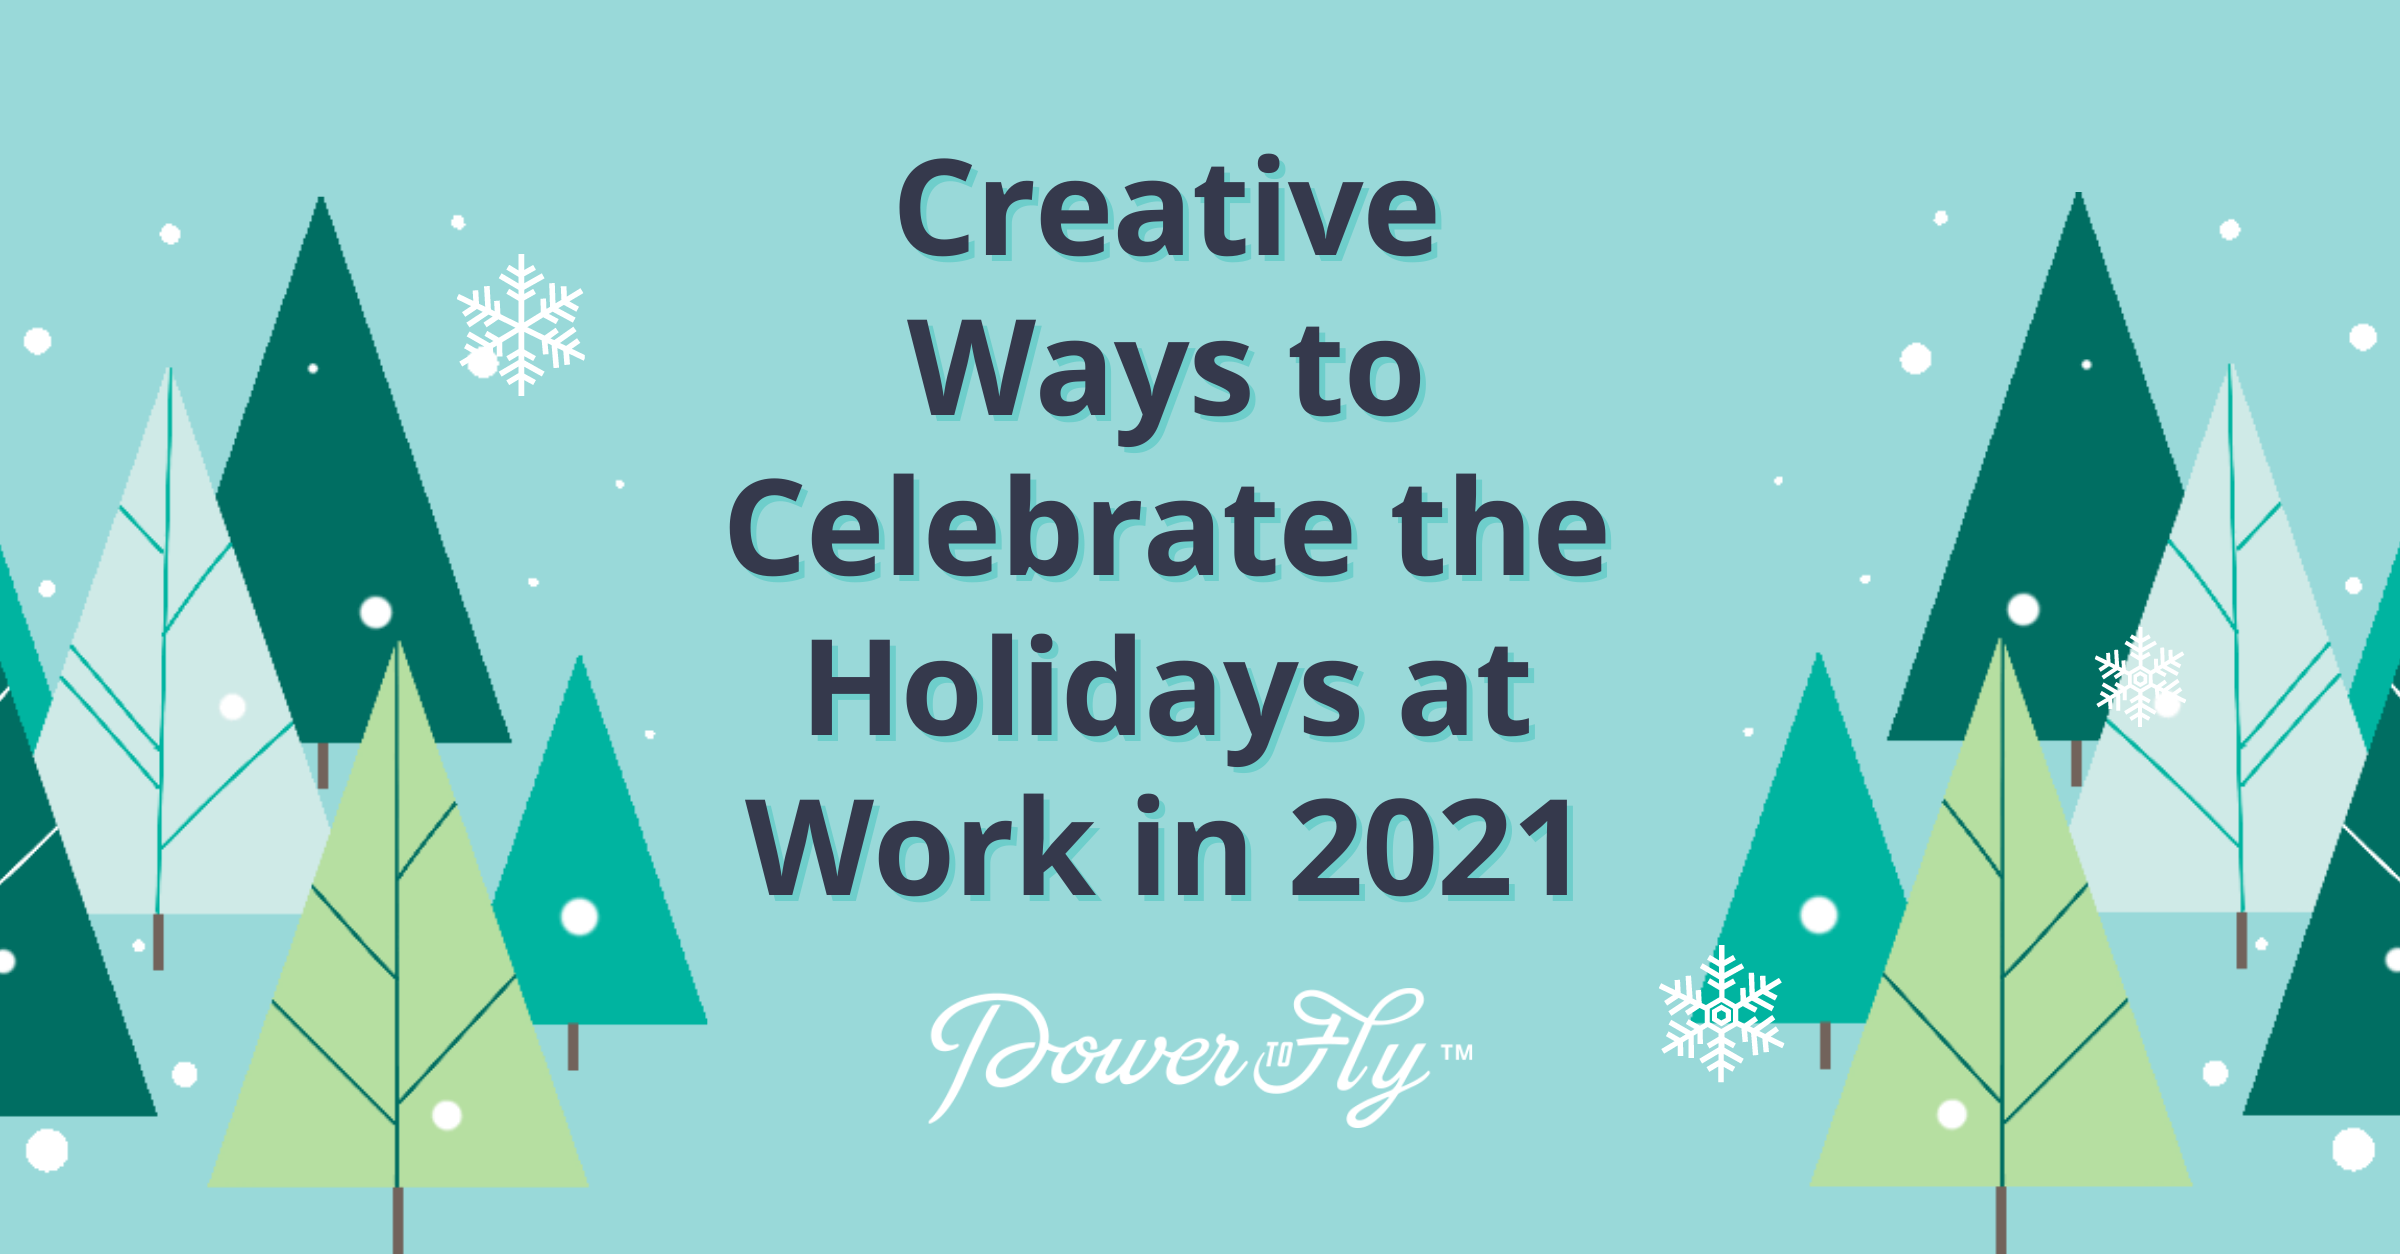 22 Creative Ways to Celebrate the Holidays at Work in 2021